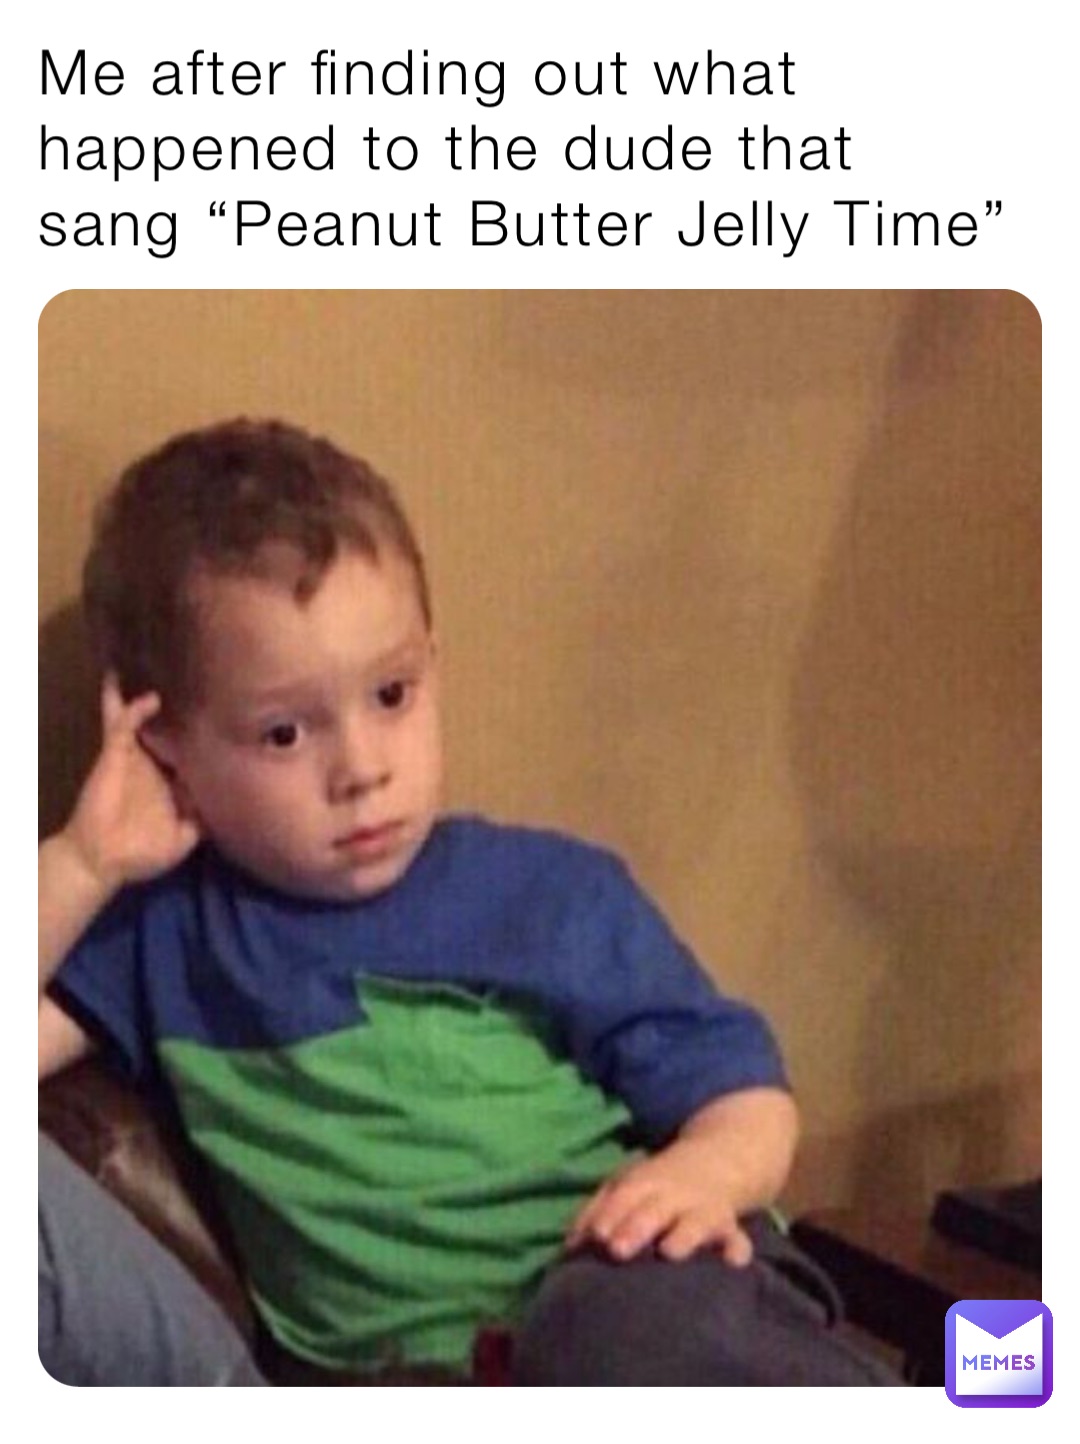 Me after finding out what happened to the dude that sang “Peanut Butter Jelly Time”